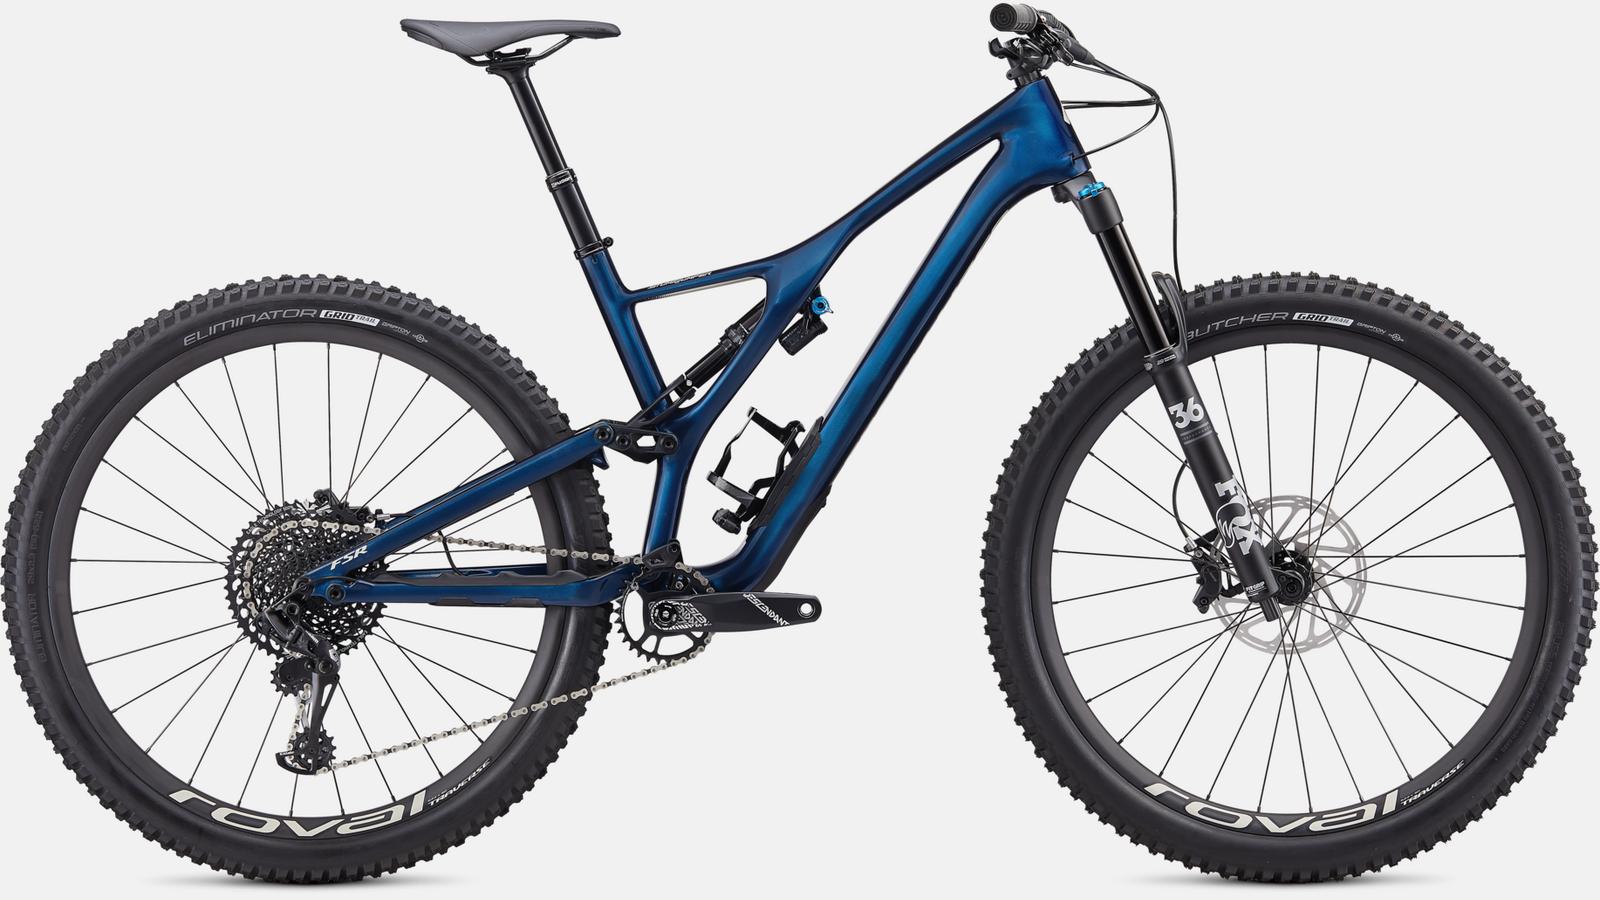 Paint for 2020 Specialized Stumpjumper Expert Carbon 29 - Gloss Navy